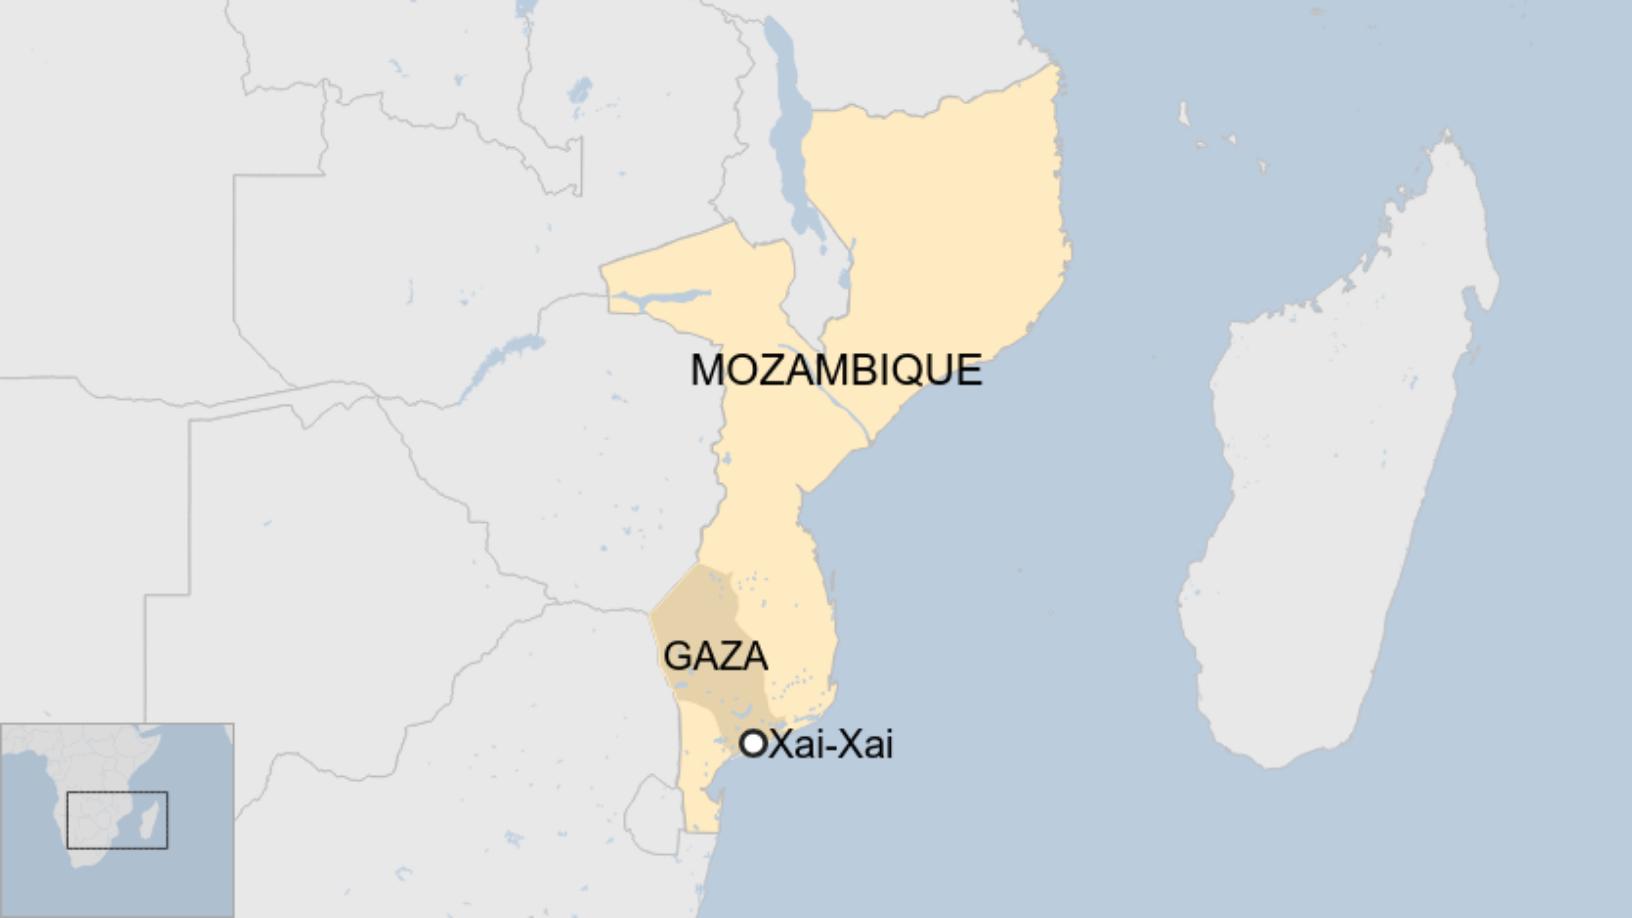 Map: A map showing the city of Xai-Xai in the southern province of Gaza in Mozambique